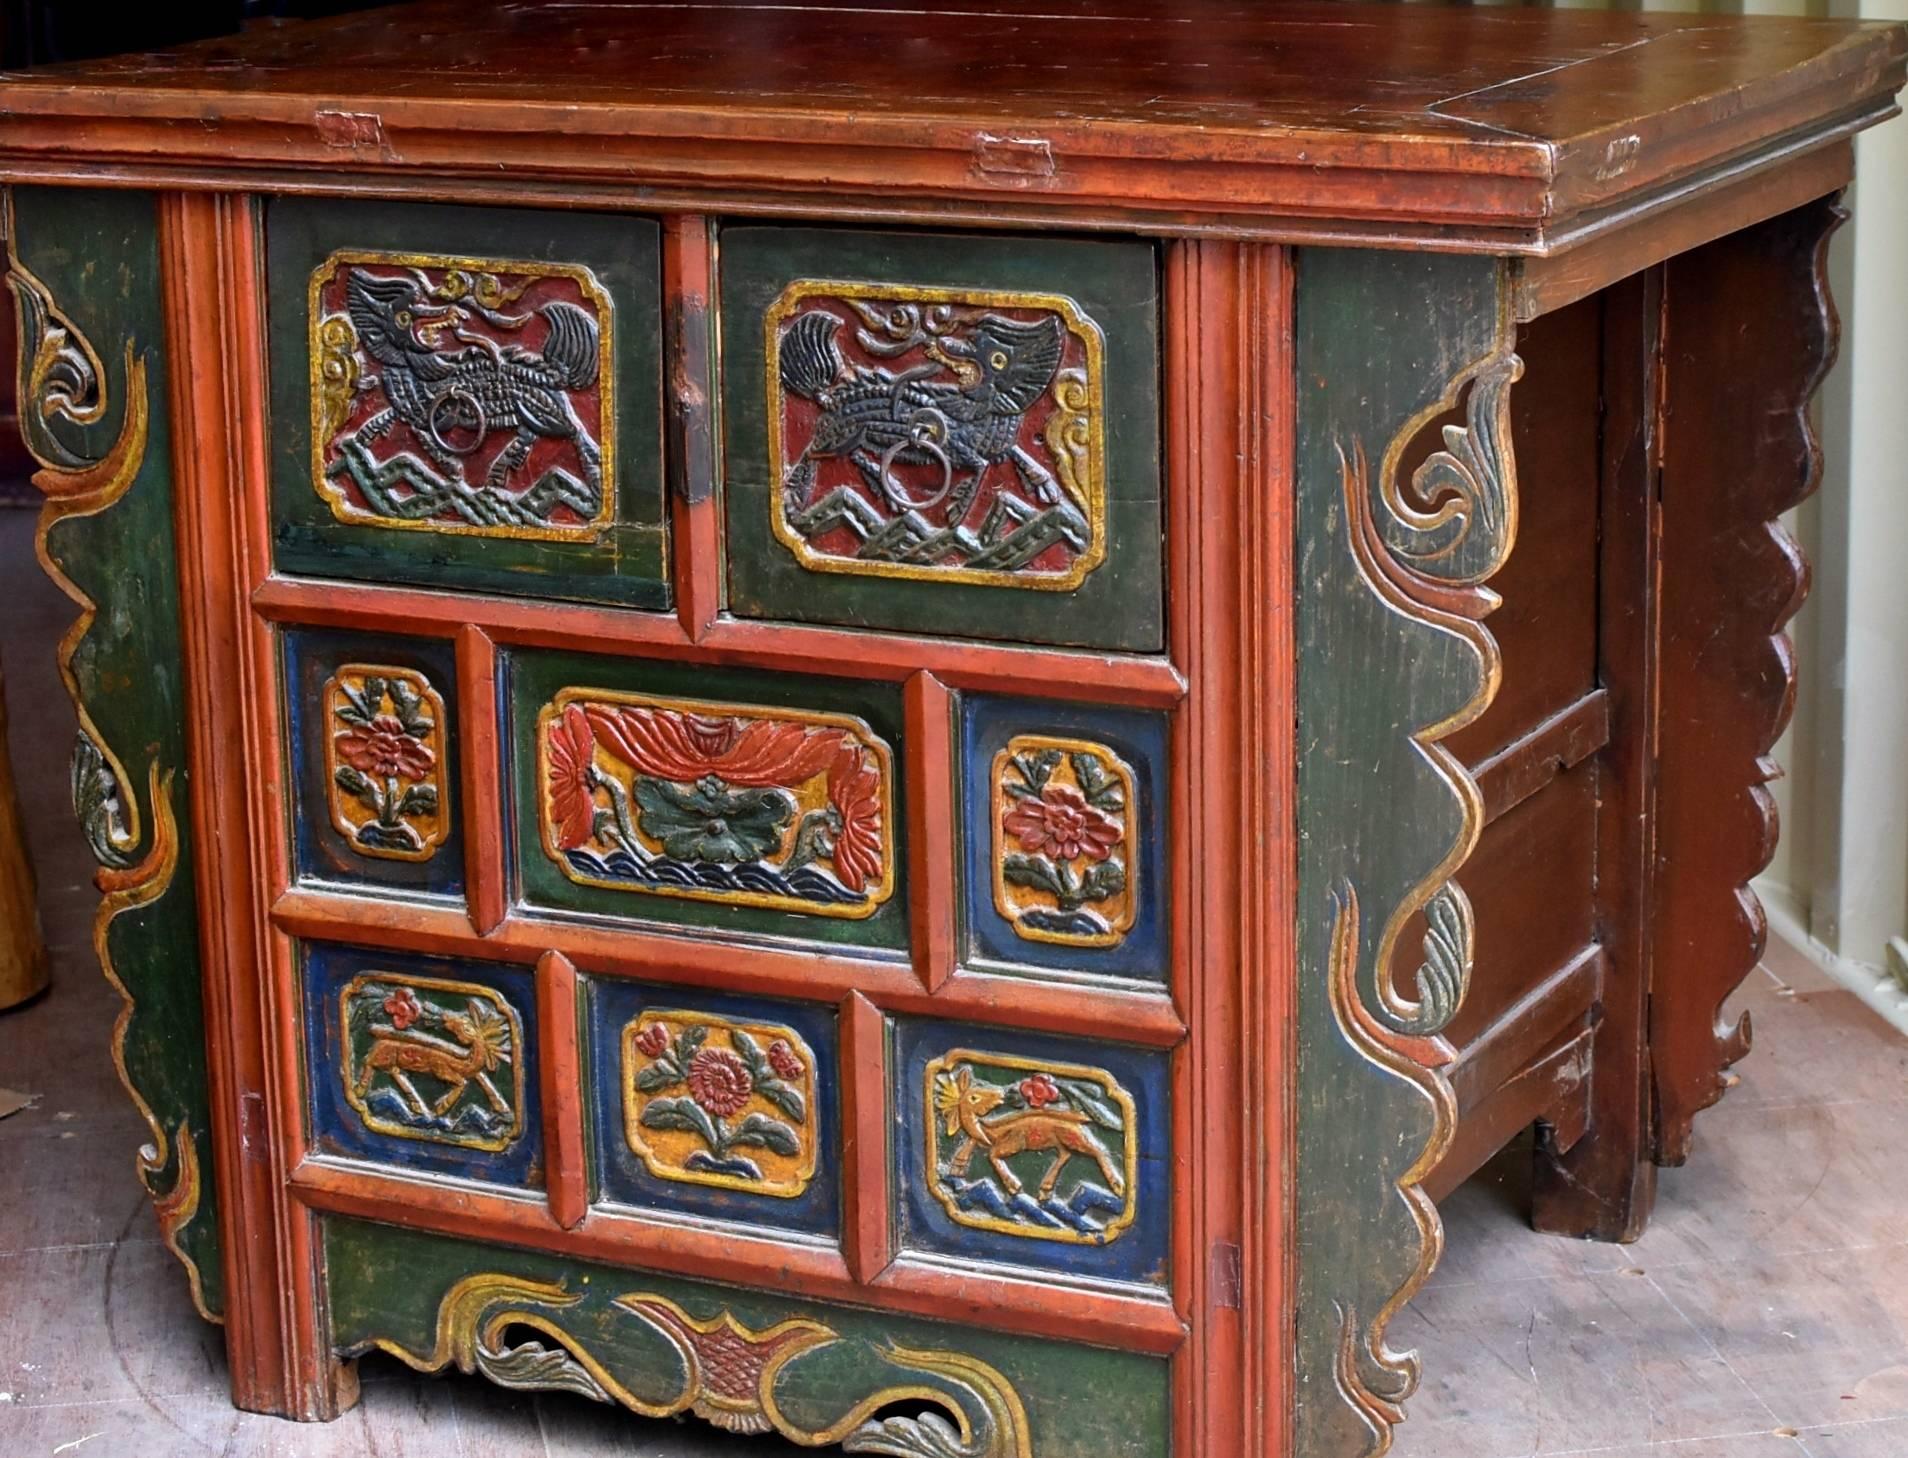 A beautiful, exotic chest from Tibet. The chest is hand-painted with mineral colors. The blue originally came from the gem stone lapis lazuli. The images are hand-carved depicting Qi Lin, the auspicious mythical animal. Lotus and peony symbolize